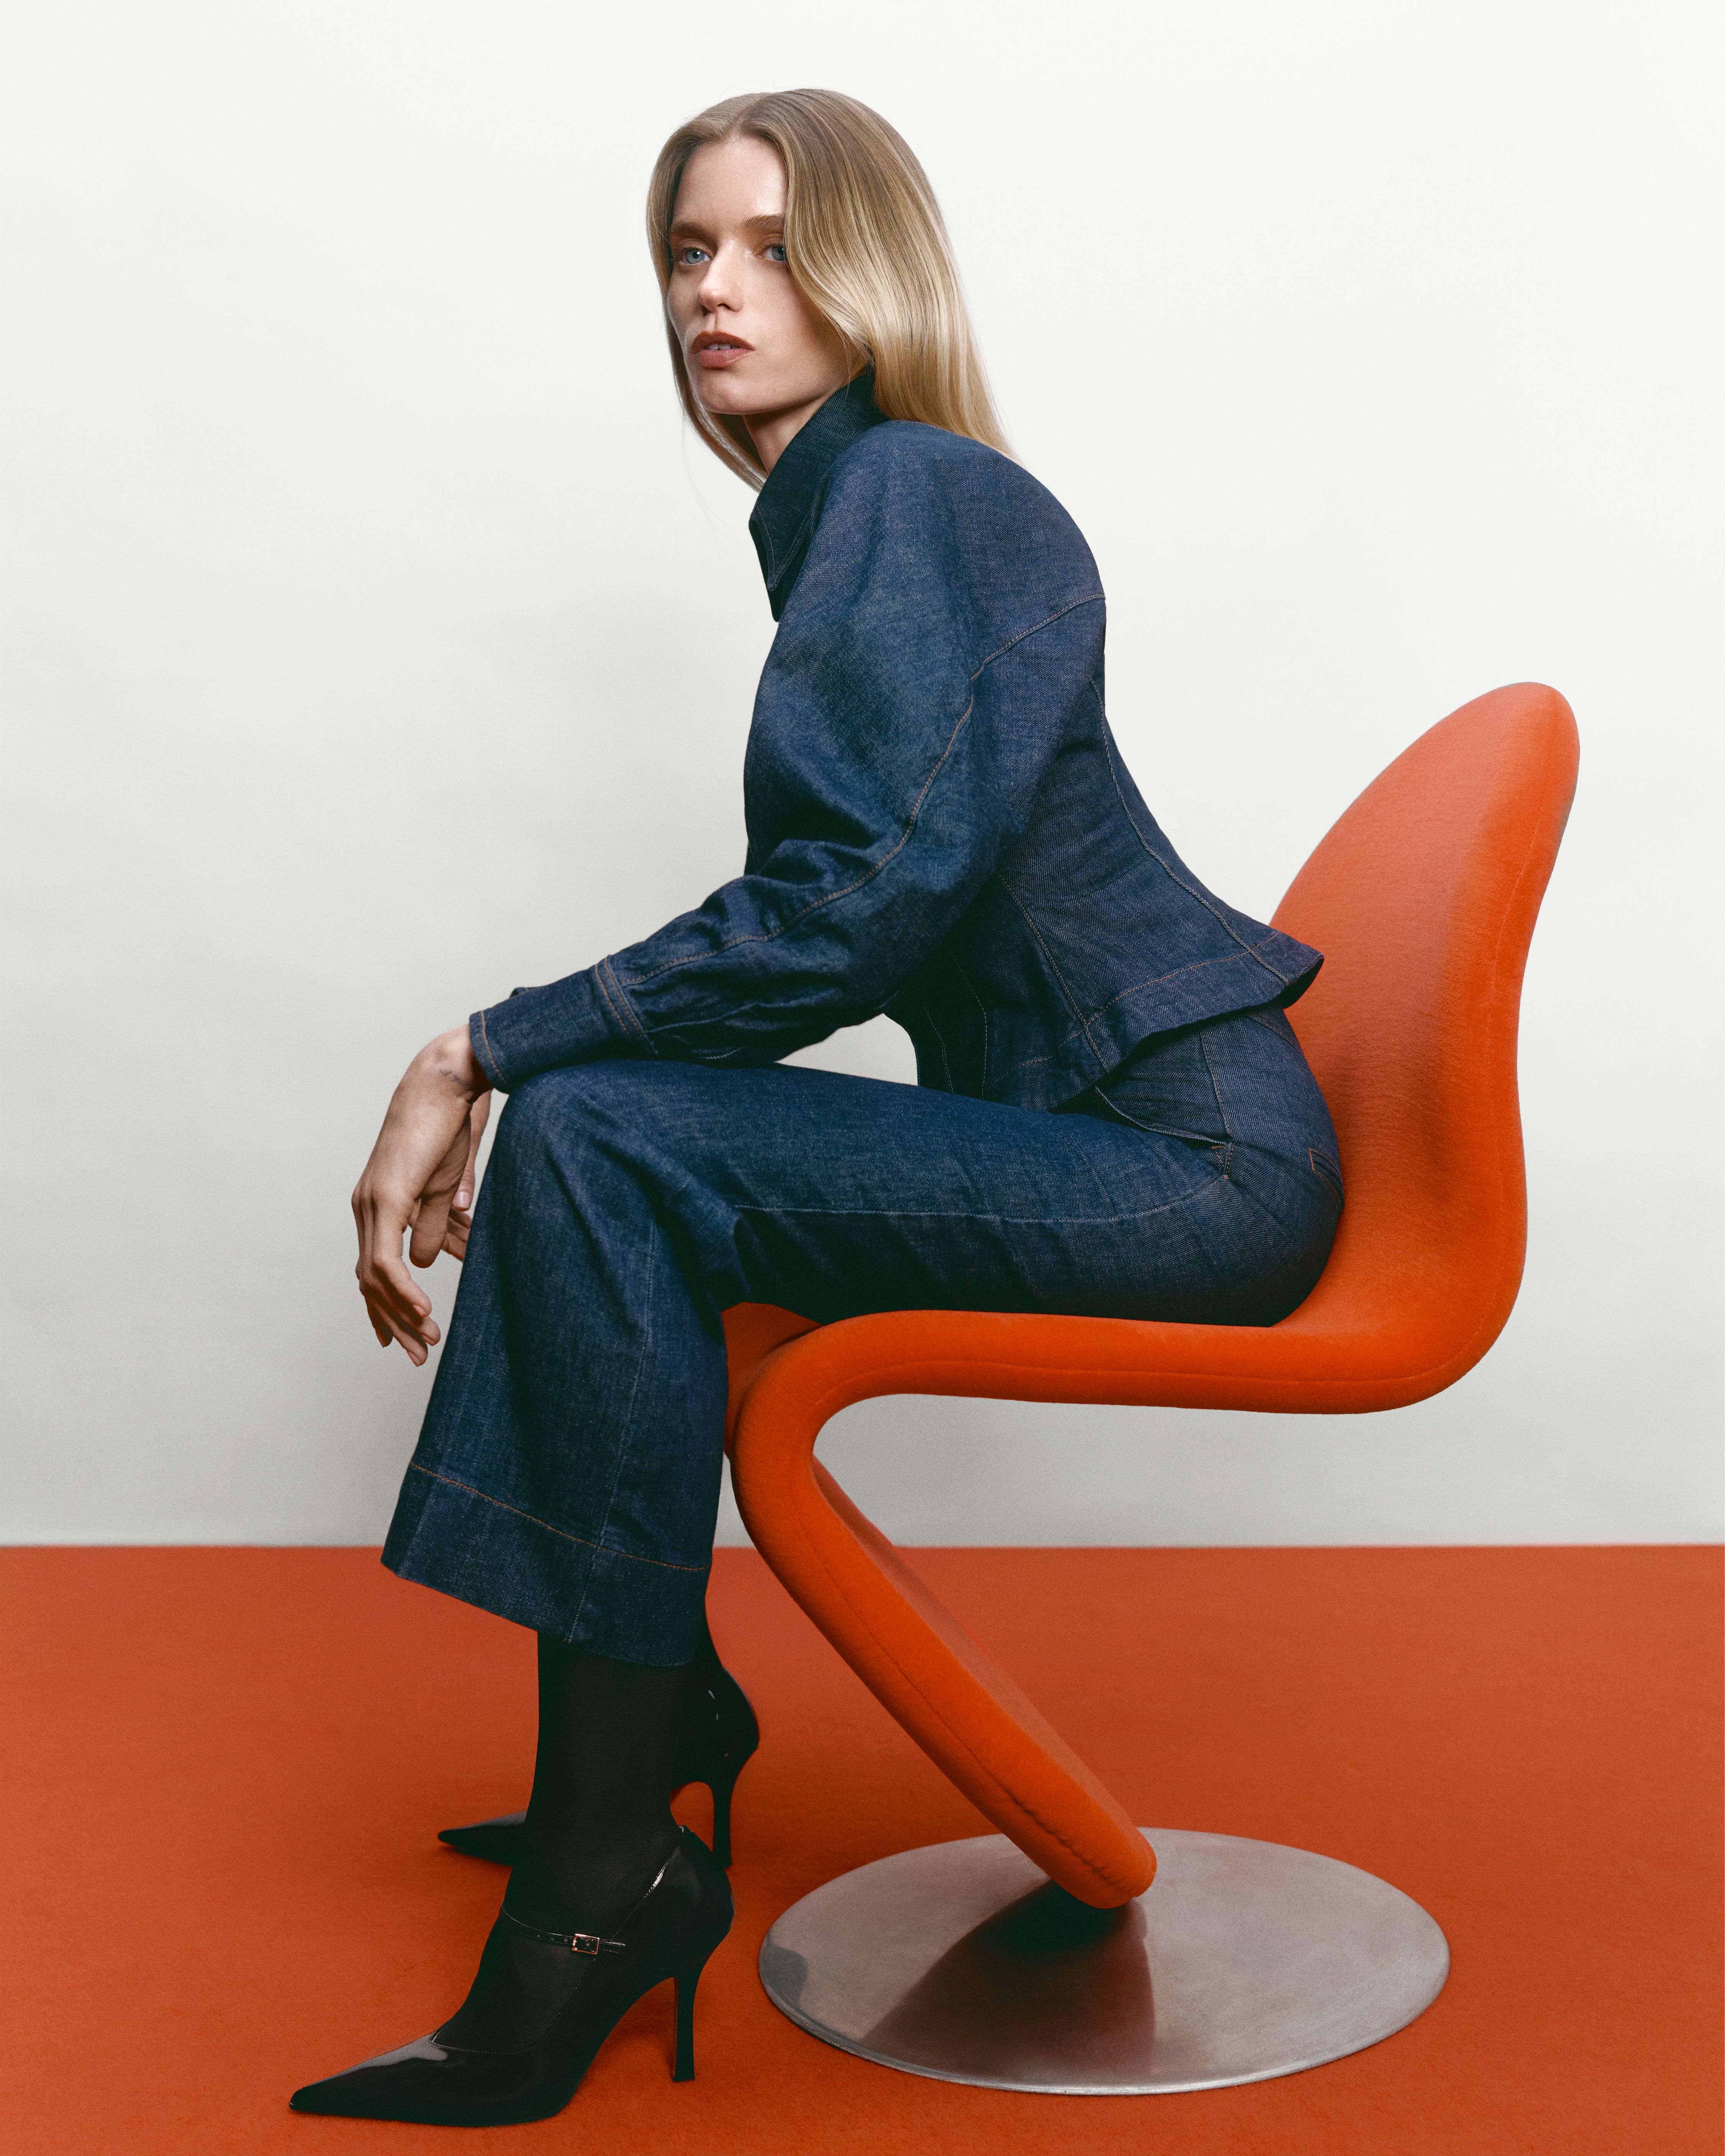 Abbey Lee sitting in a red chair facing the side wearing an indigo denim jacket and jeans